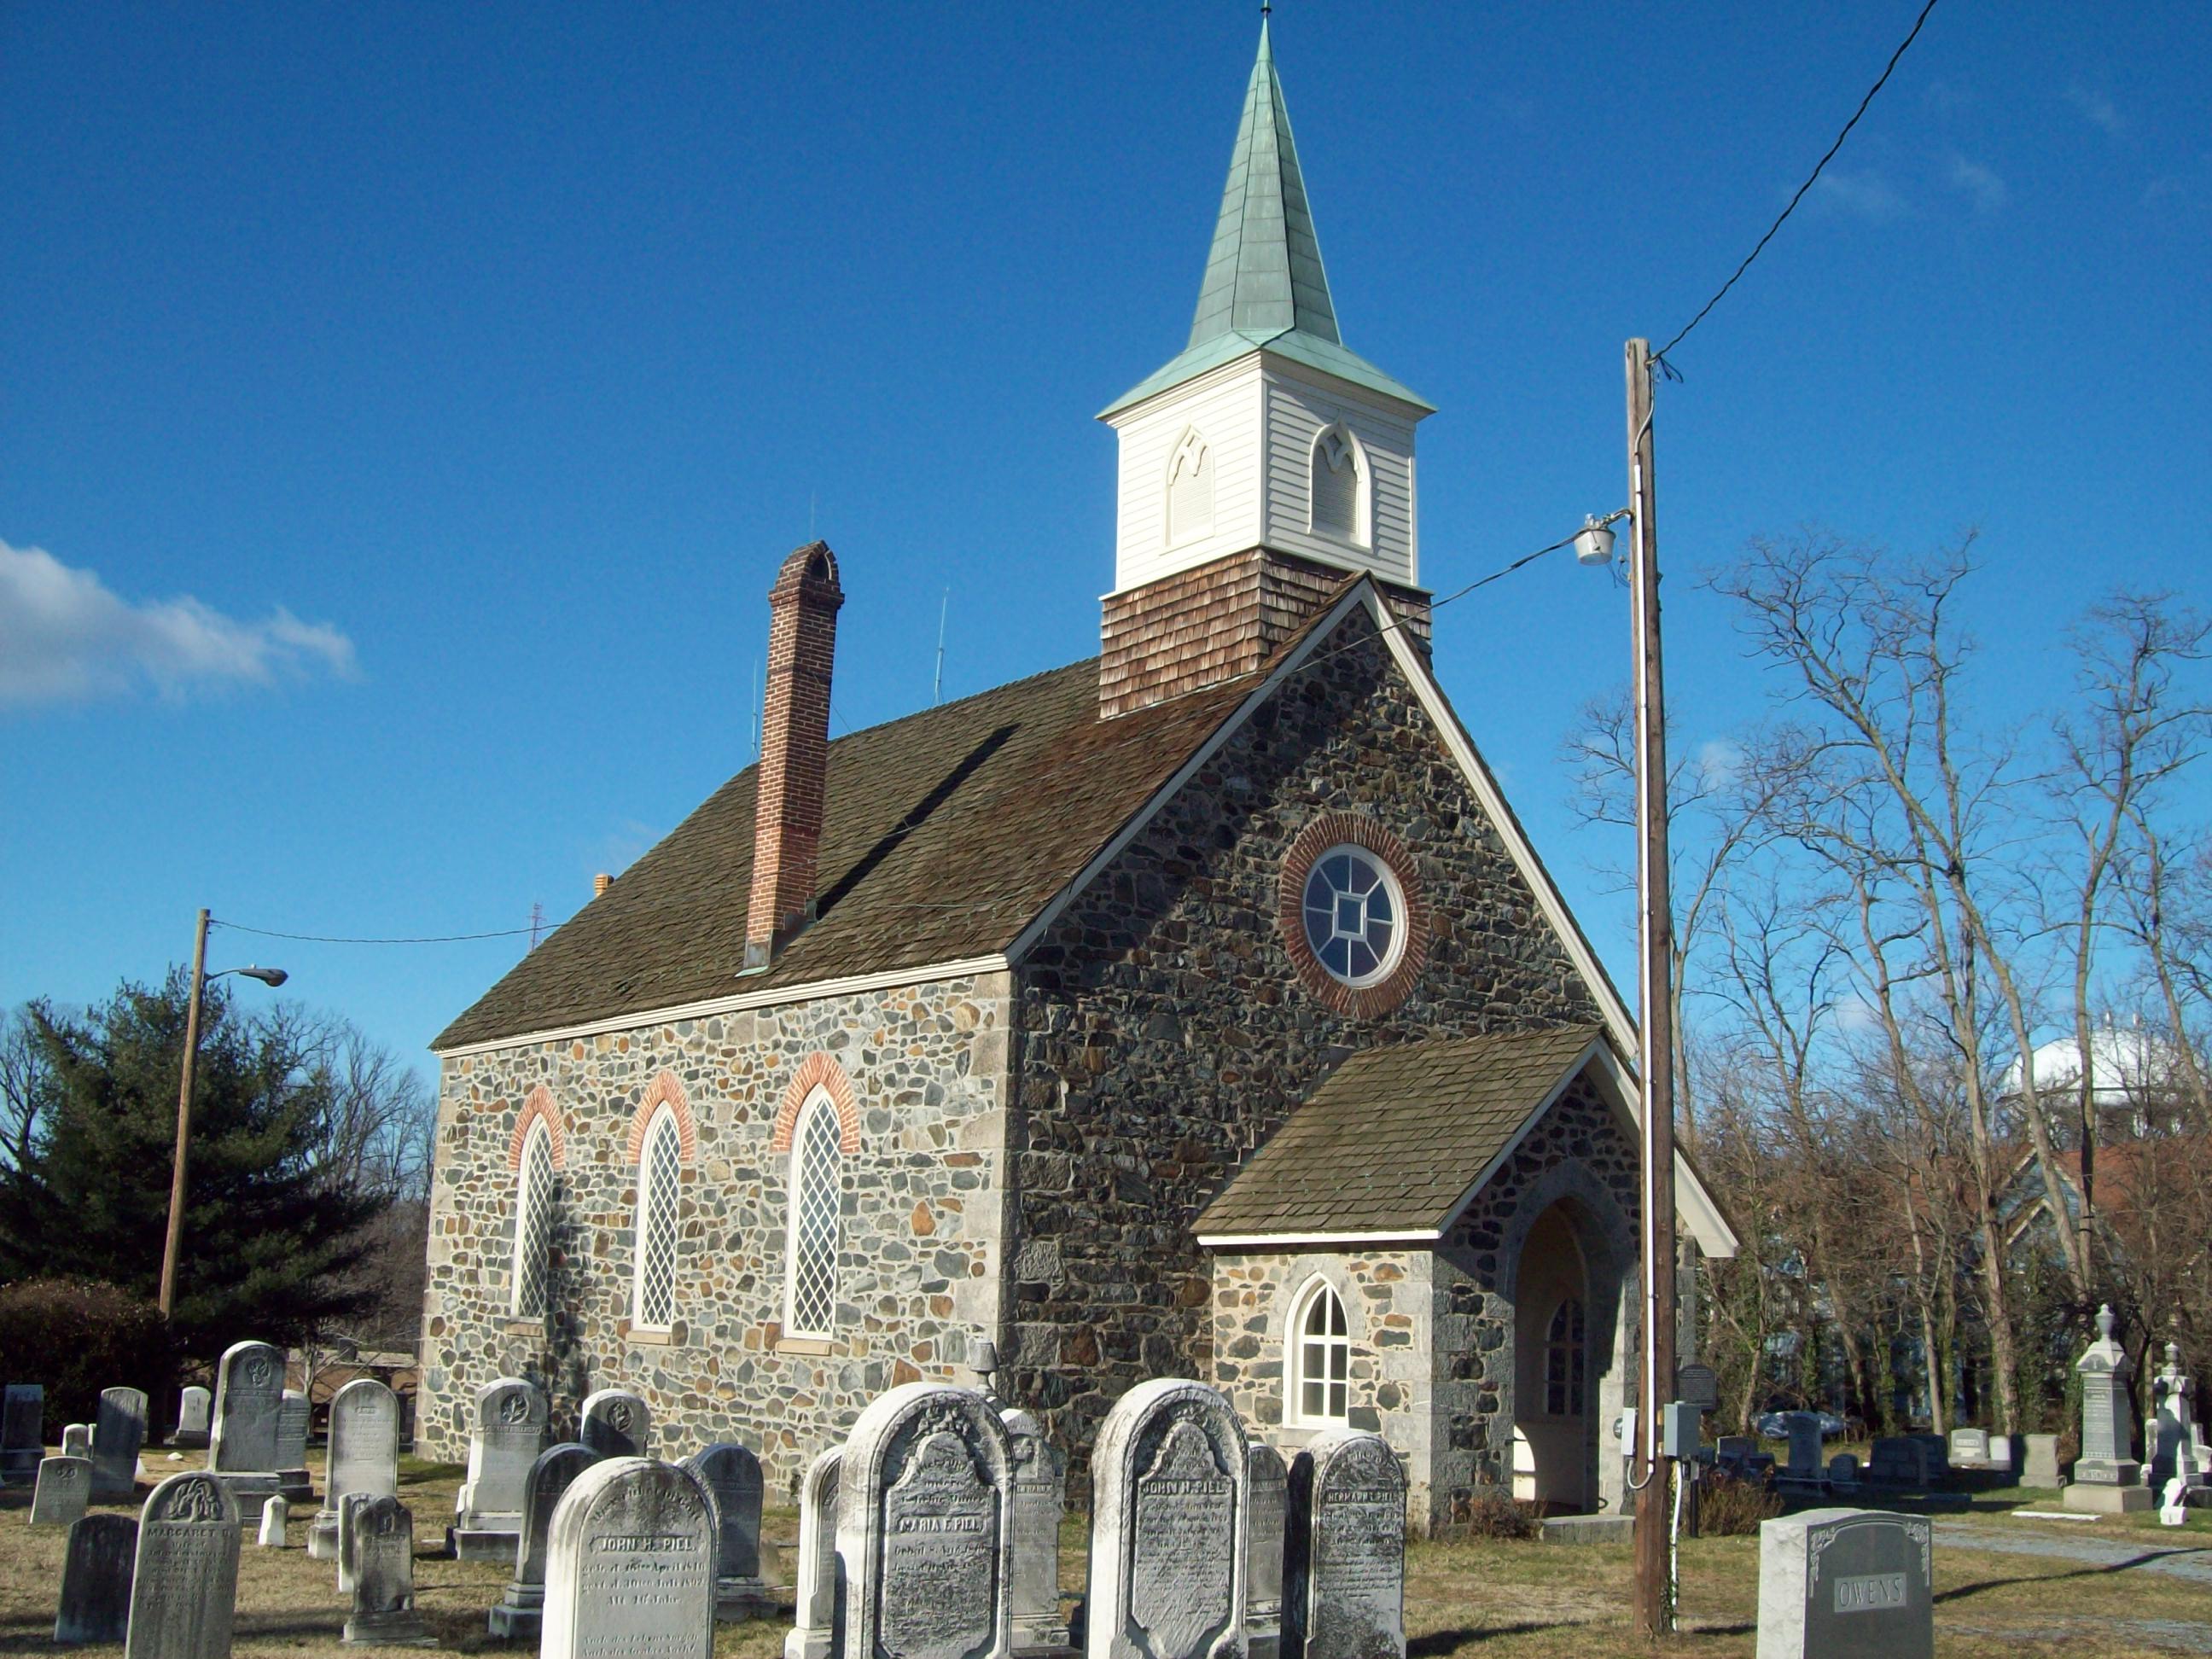 File:Old Salem Church and Cemetery Dec 09.JPG - Wikimedia Commons